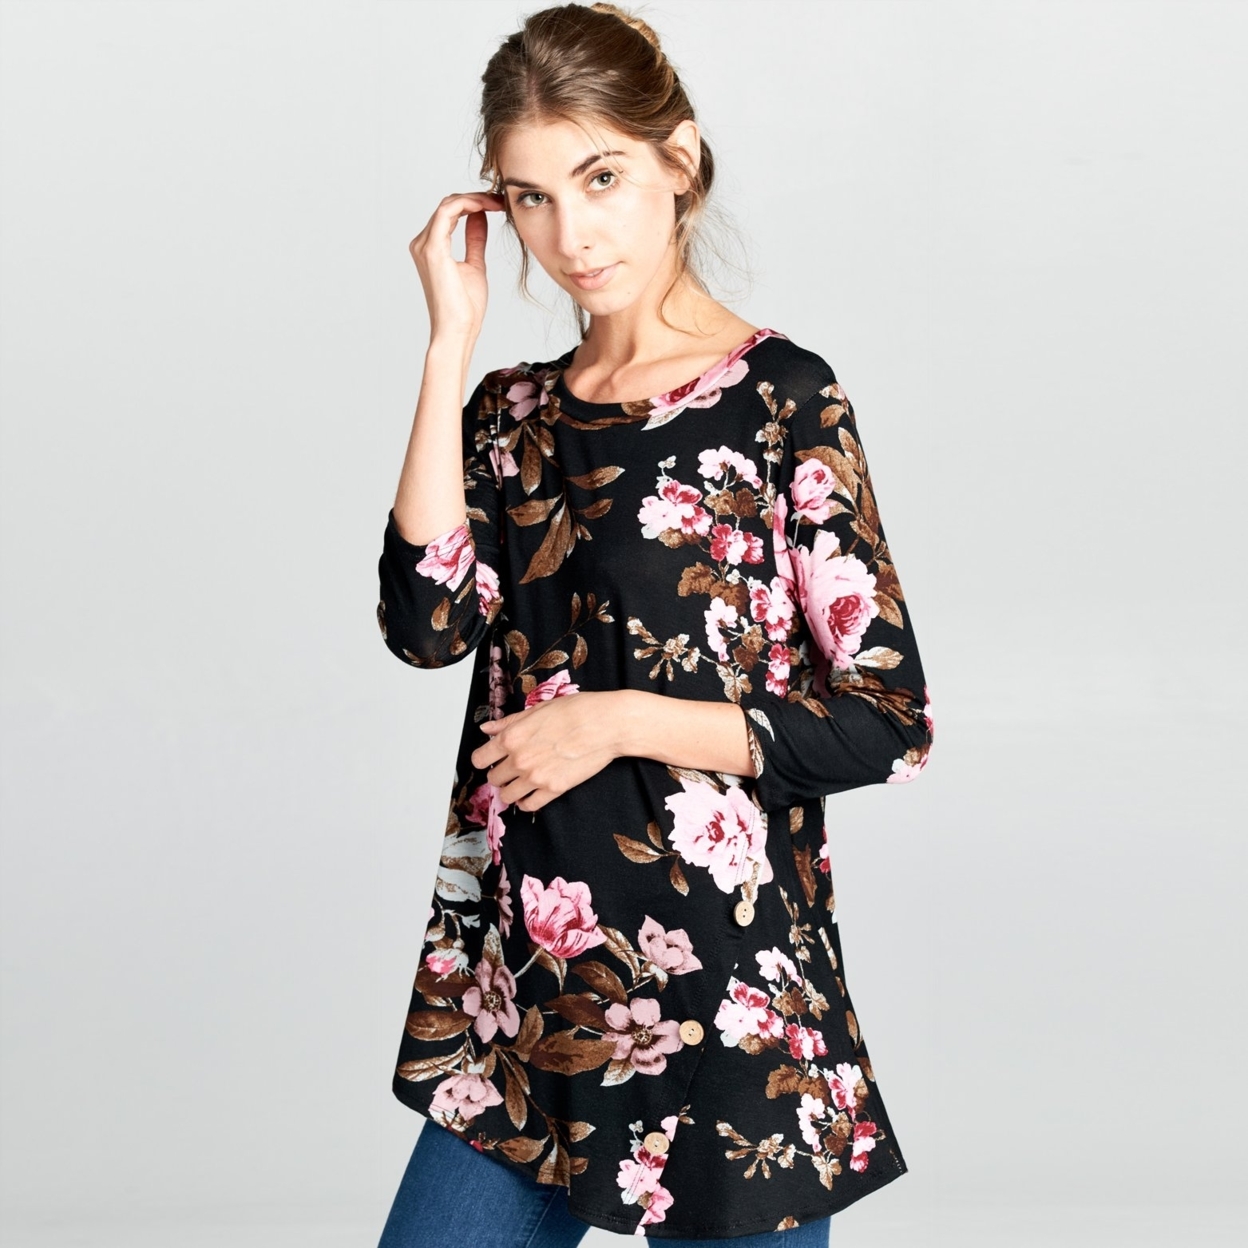 Natural Wood Button Floral Top - Black, Small (2-6)